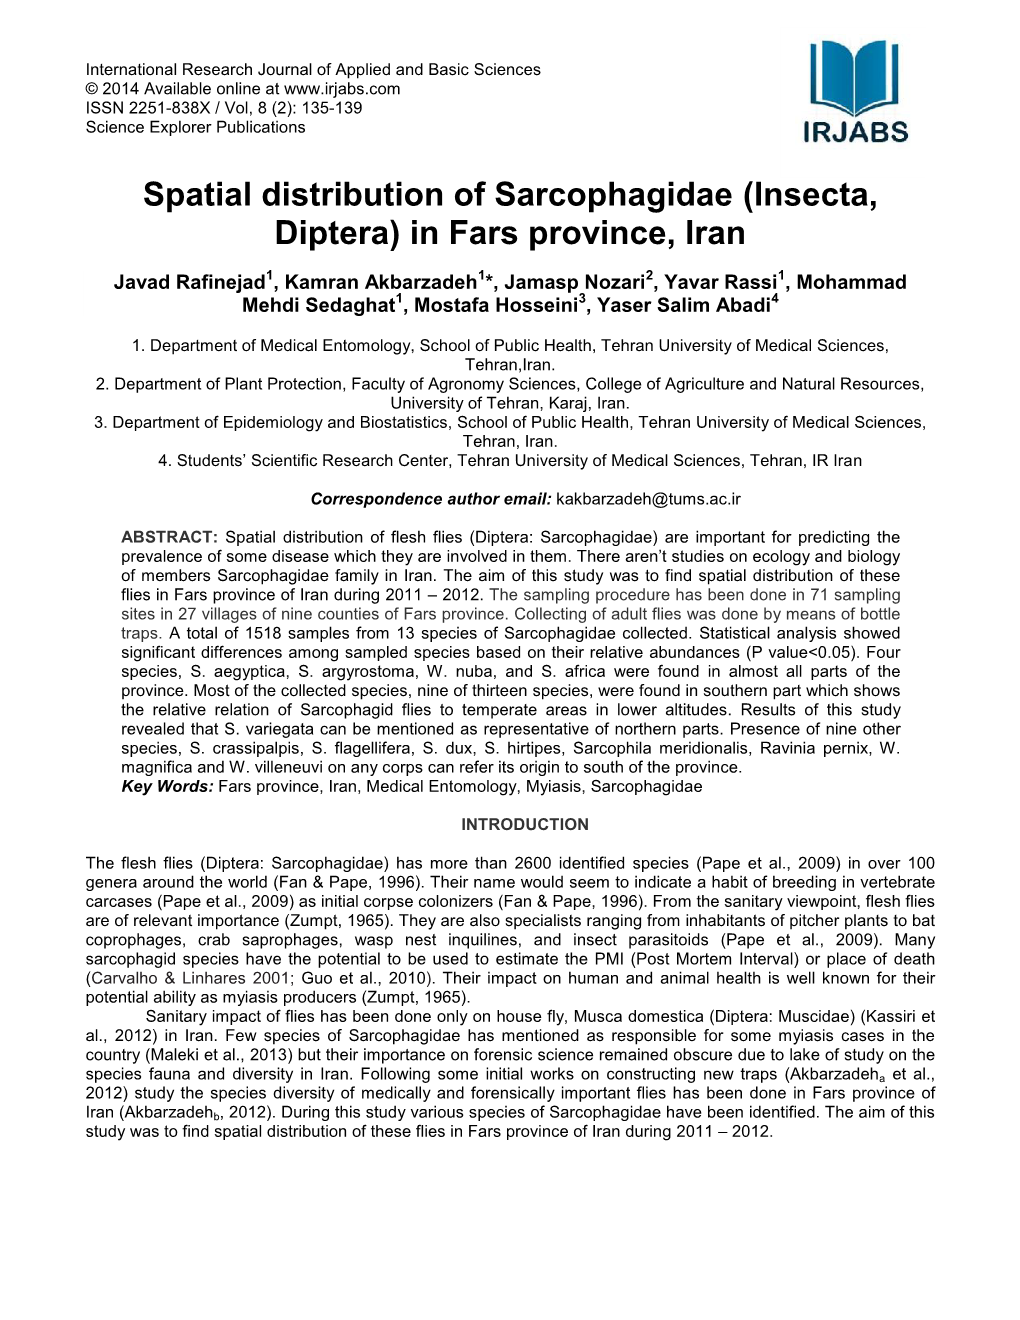 Spatial Distribution of Sarcophagidae (Insecta, Diptera) in Fars Province, Iran